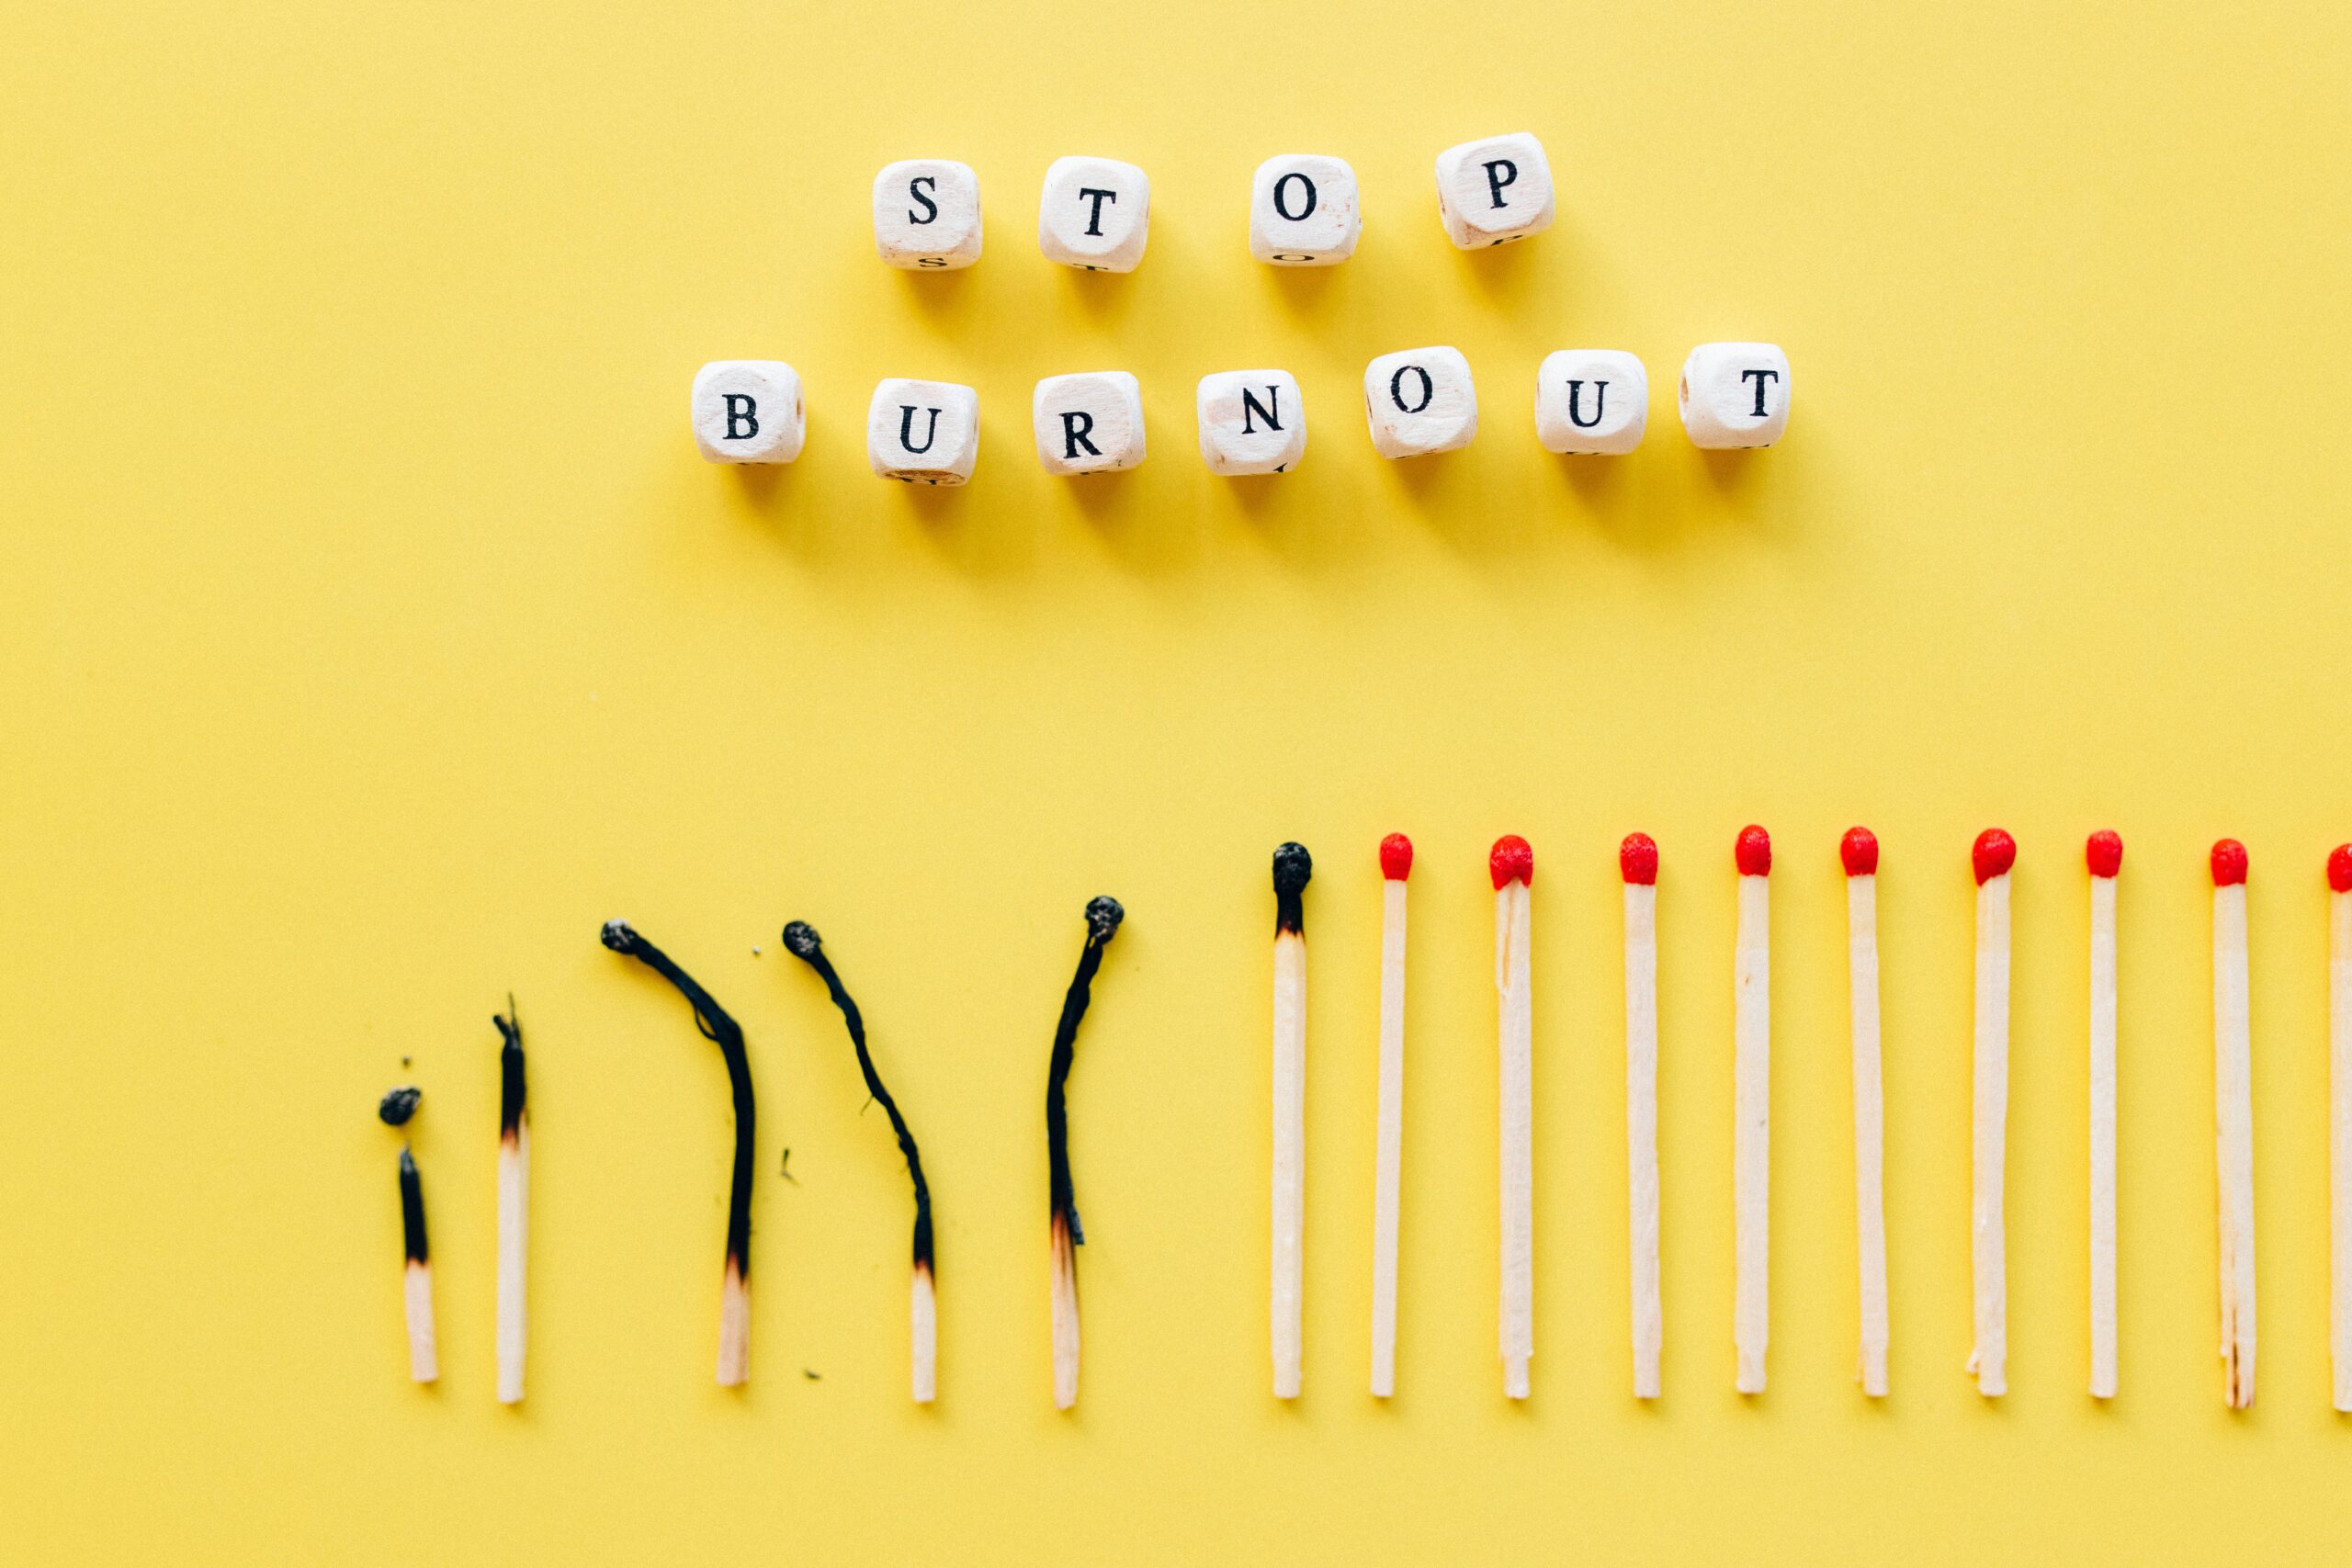 Burnout, prevent it before it’s too late